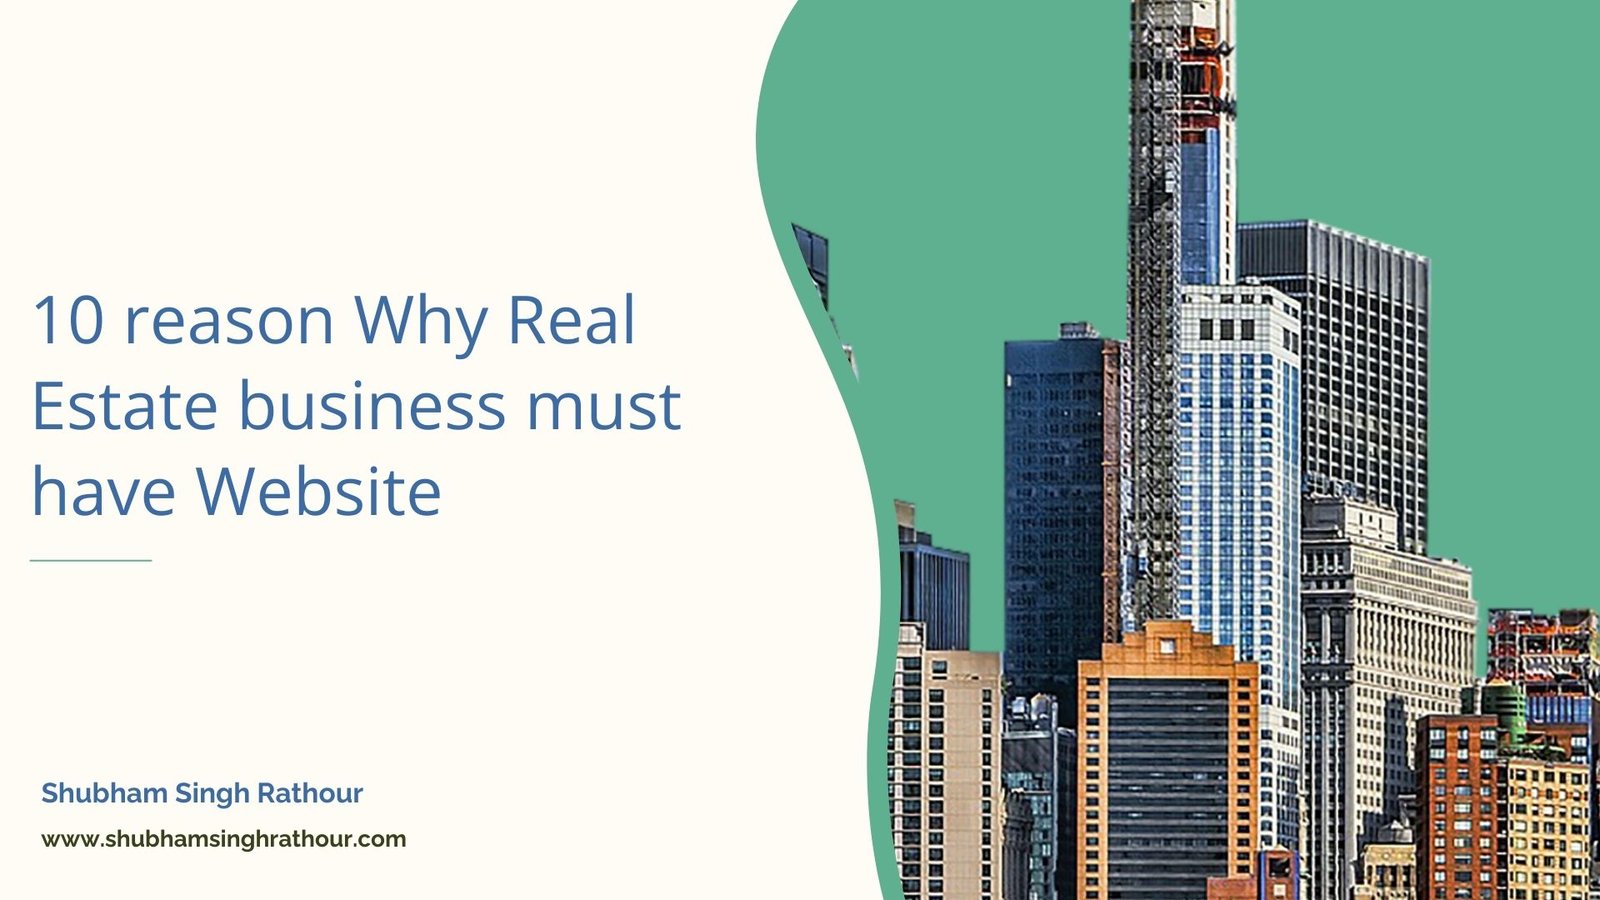 10 reason Why Real Estate business must have Website